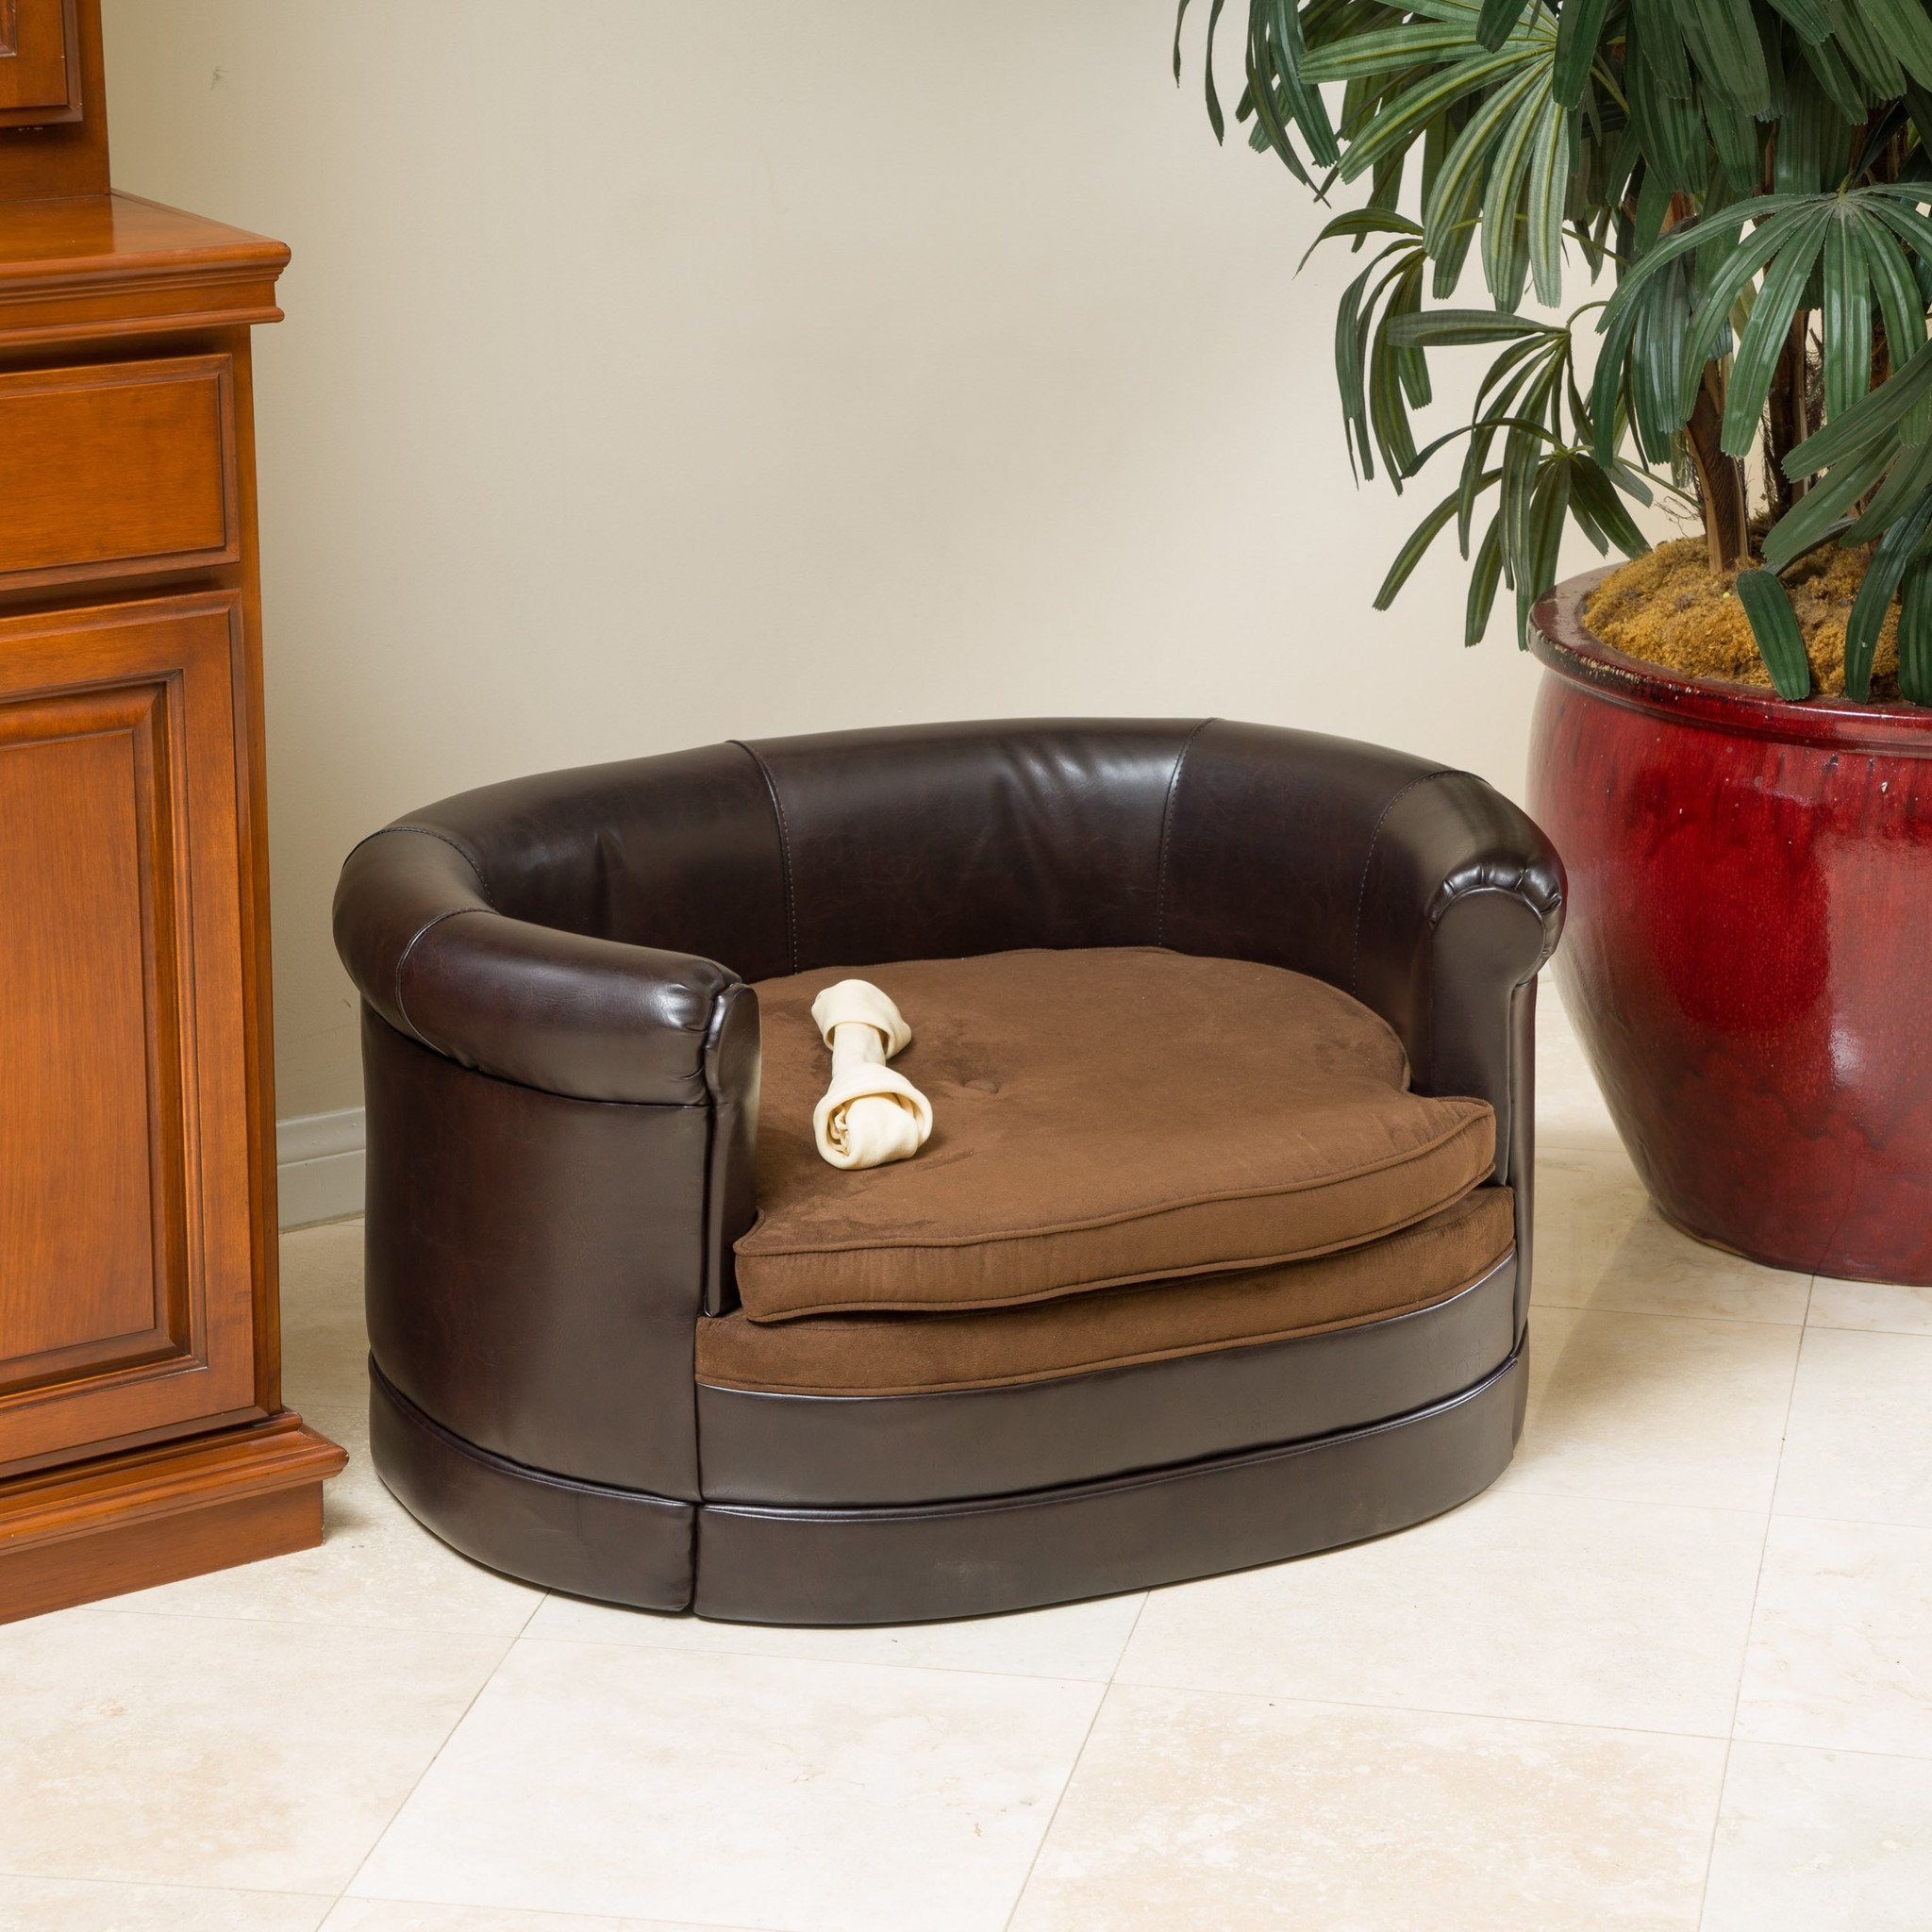 Rover Oval Chocolate Brown Leather Dog Sofa Bed